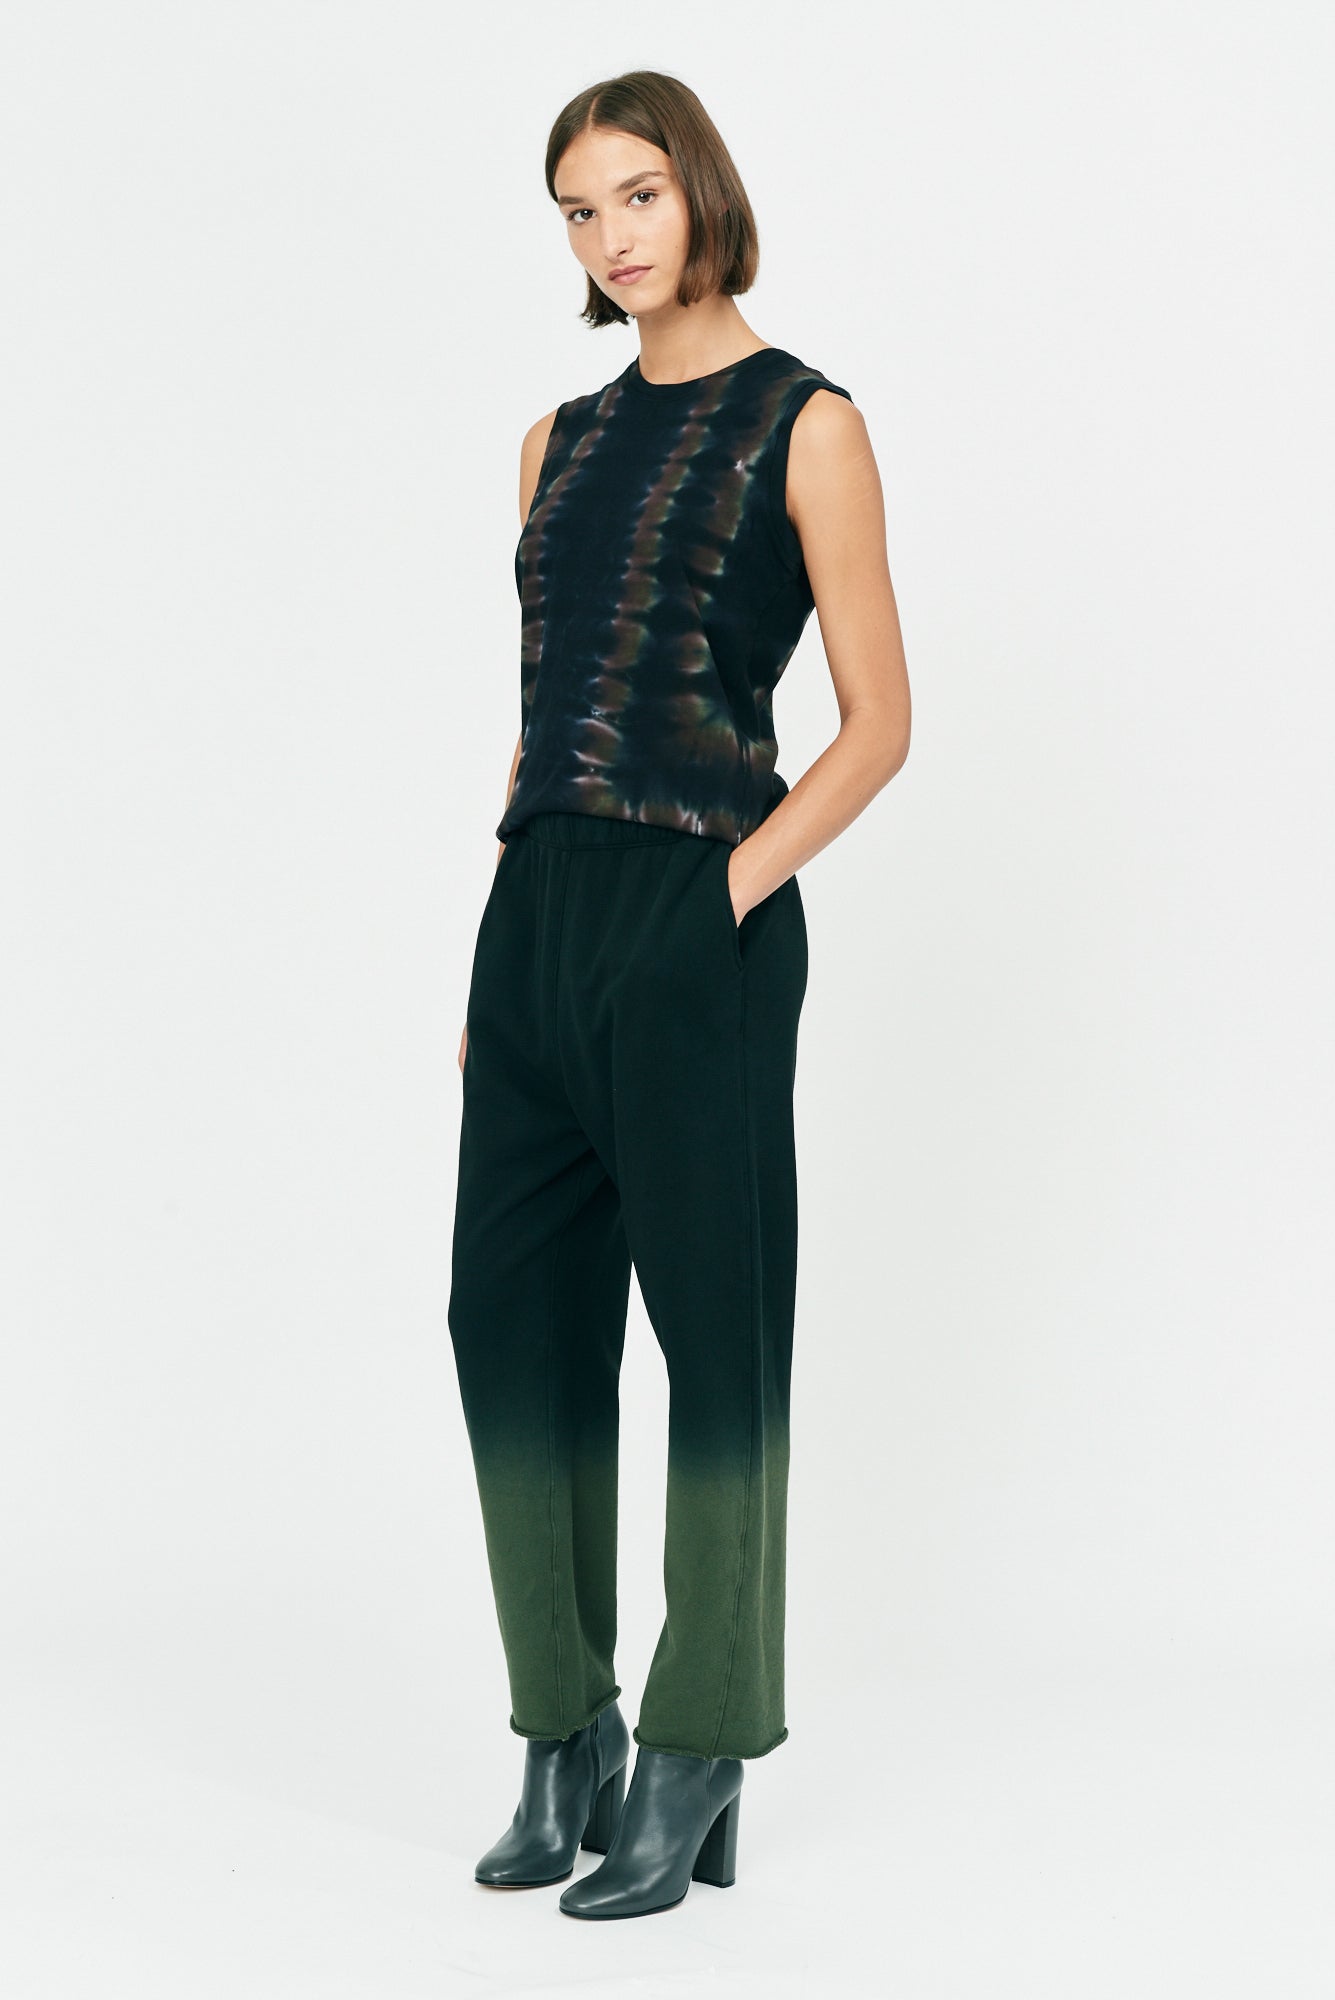 Forest Gradient Reflective Pond and Jersey Ankle Pant Full Side View